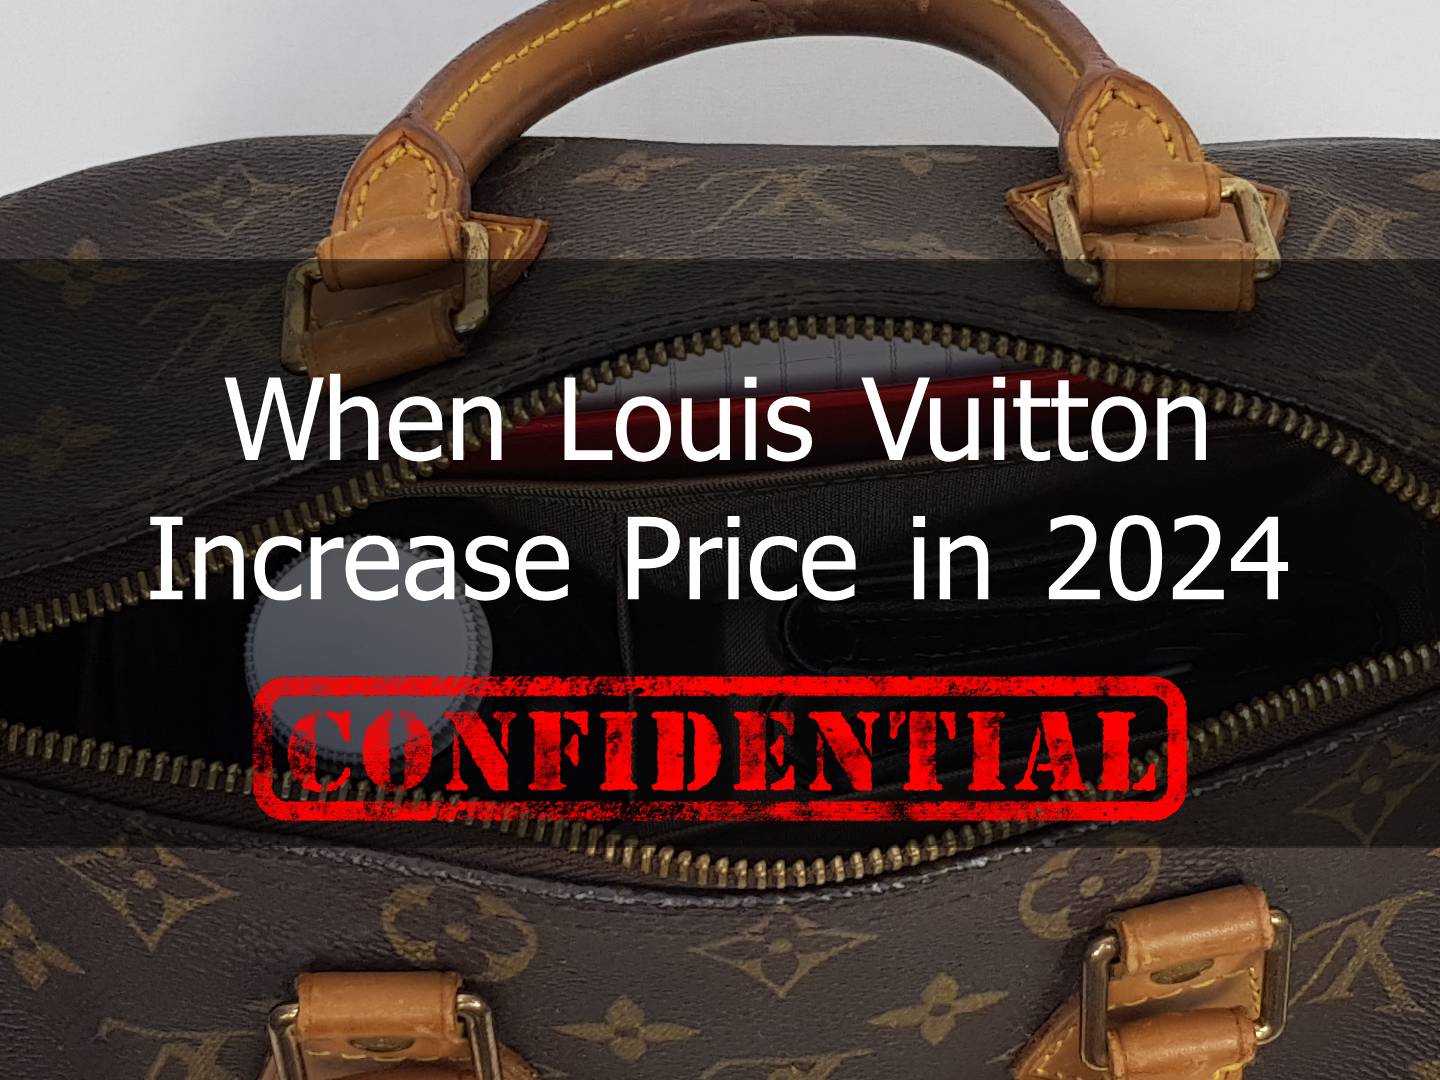 When will Louis Vuitton increase price in 2024?